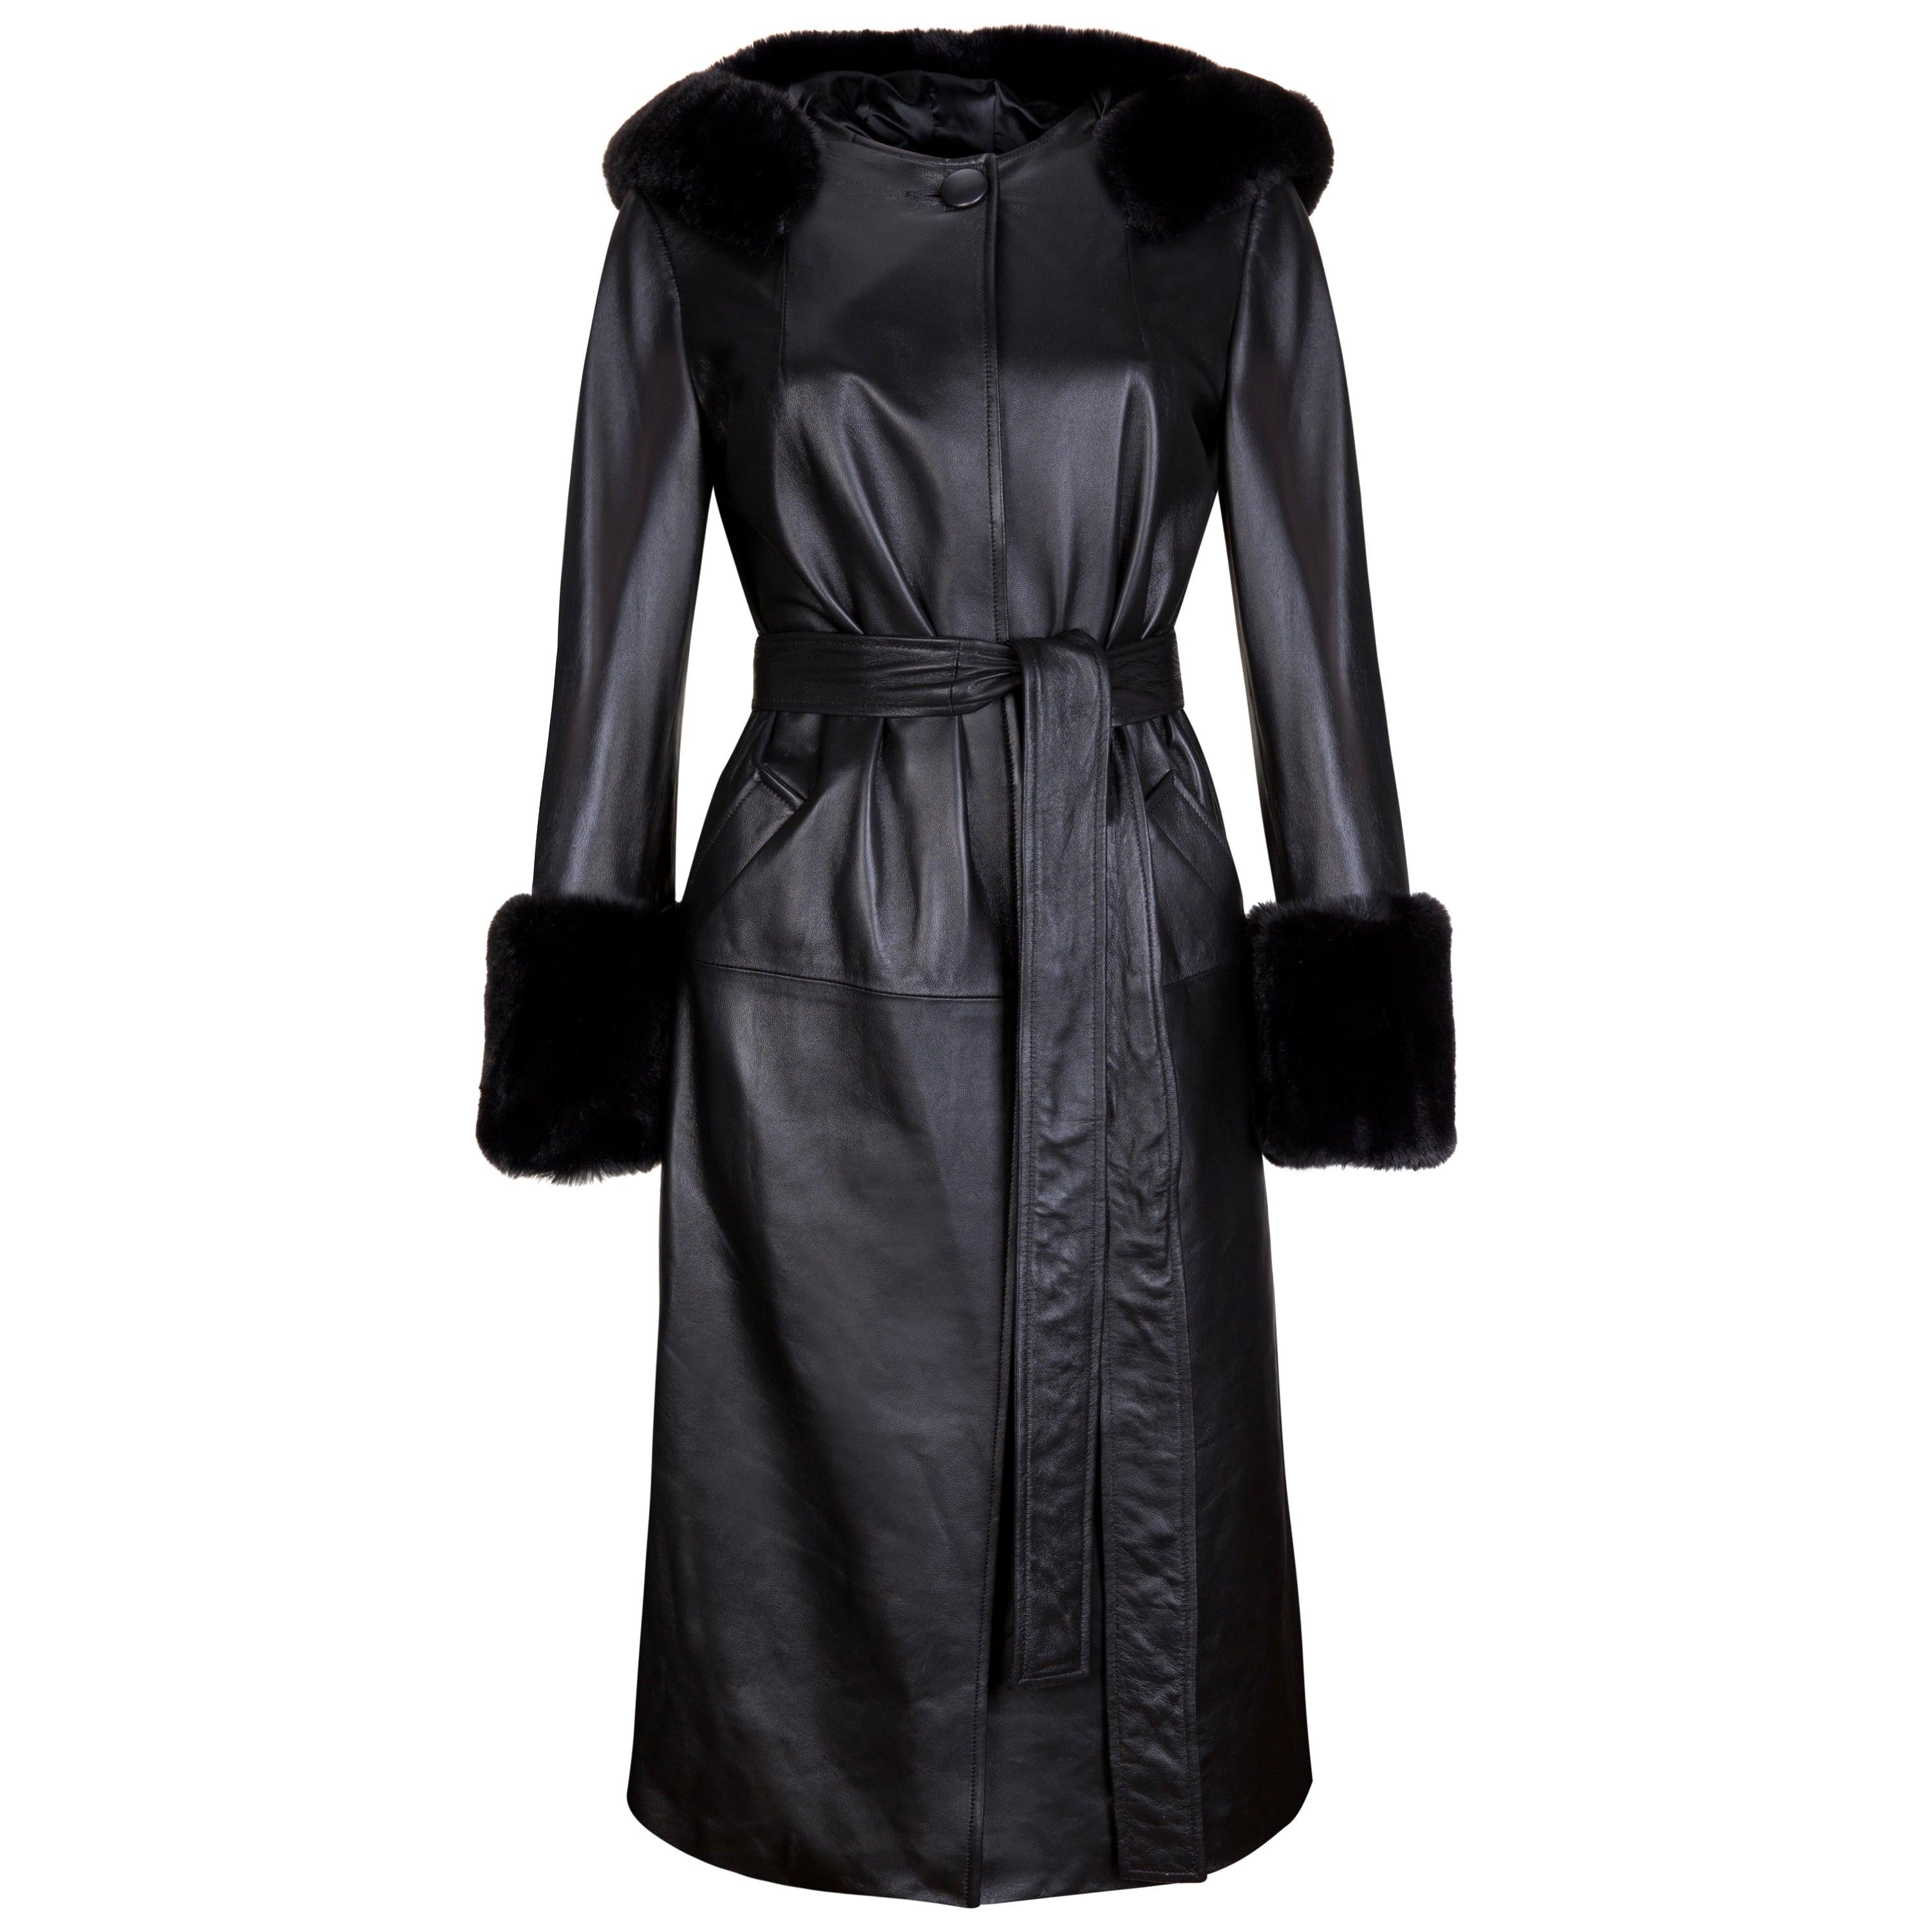 Verheyen London Hooded Leather Trench Coat in Black with Faux Fur - Size uk 8